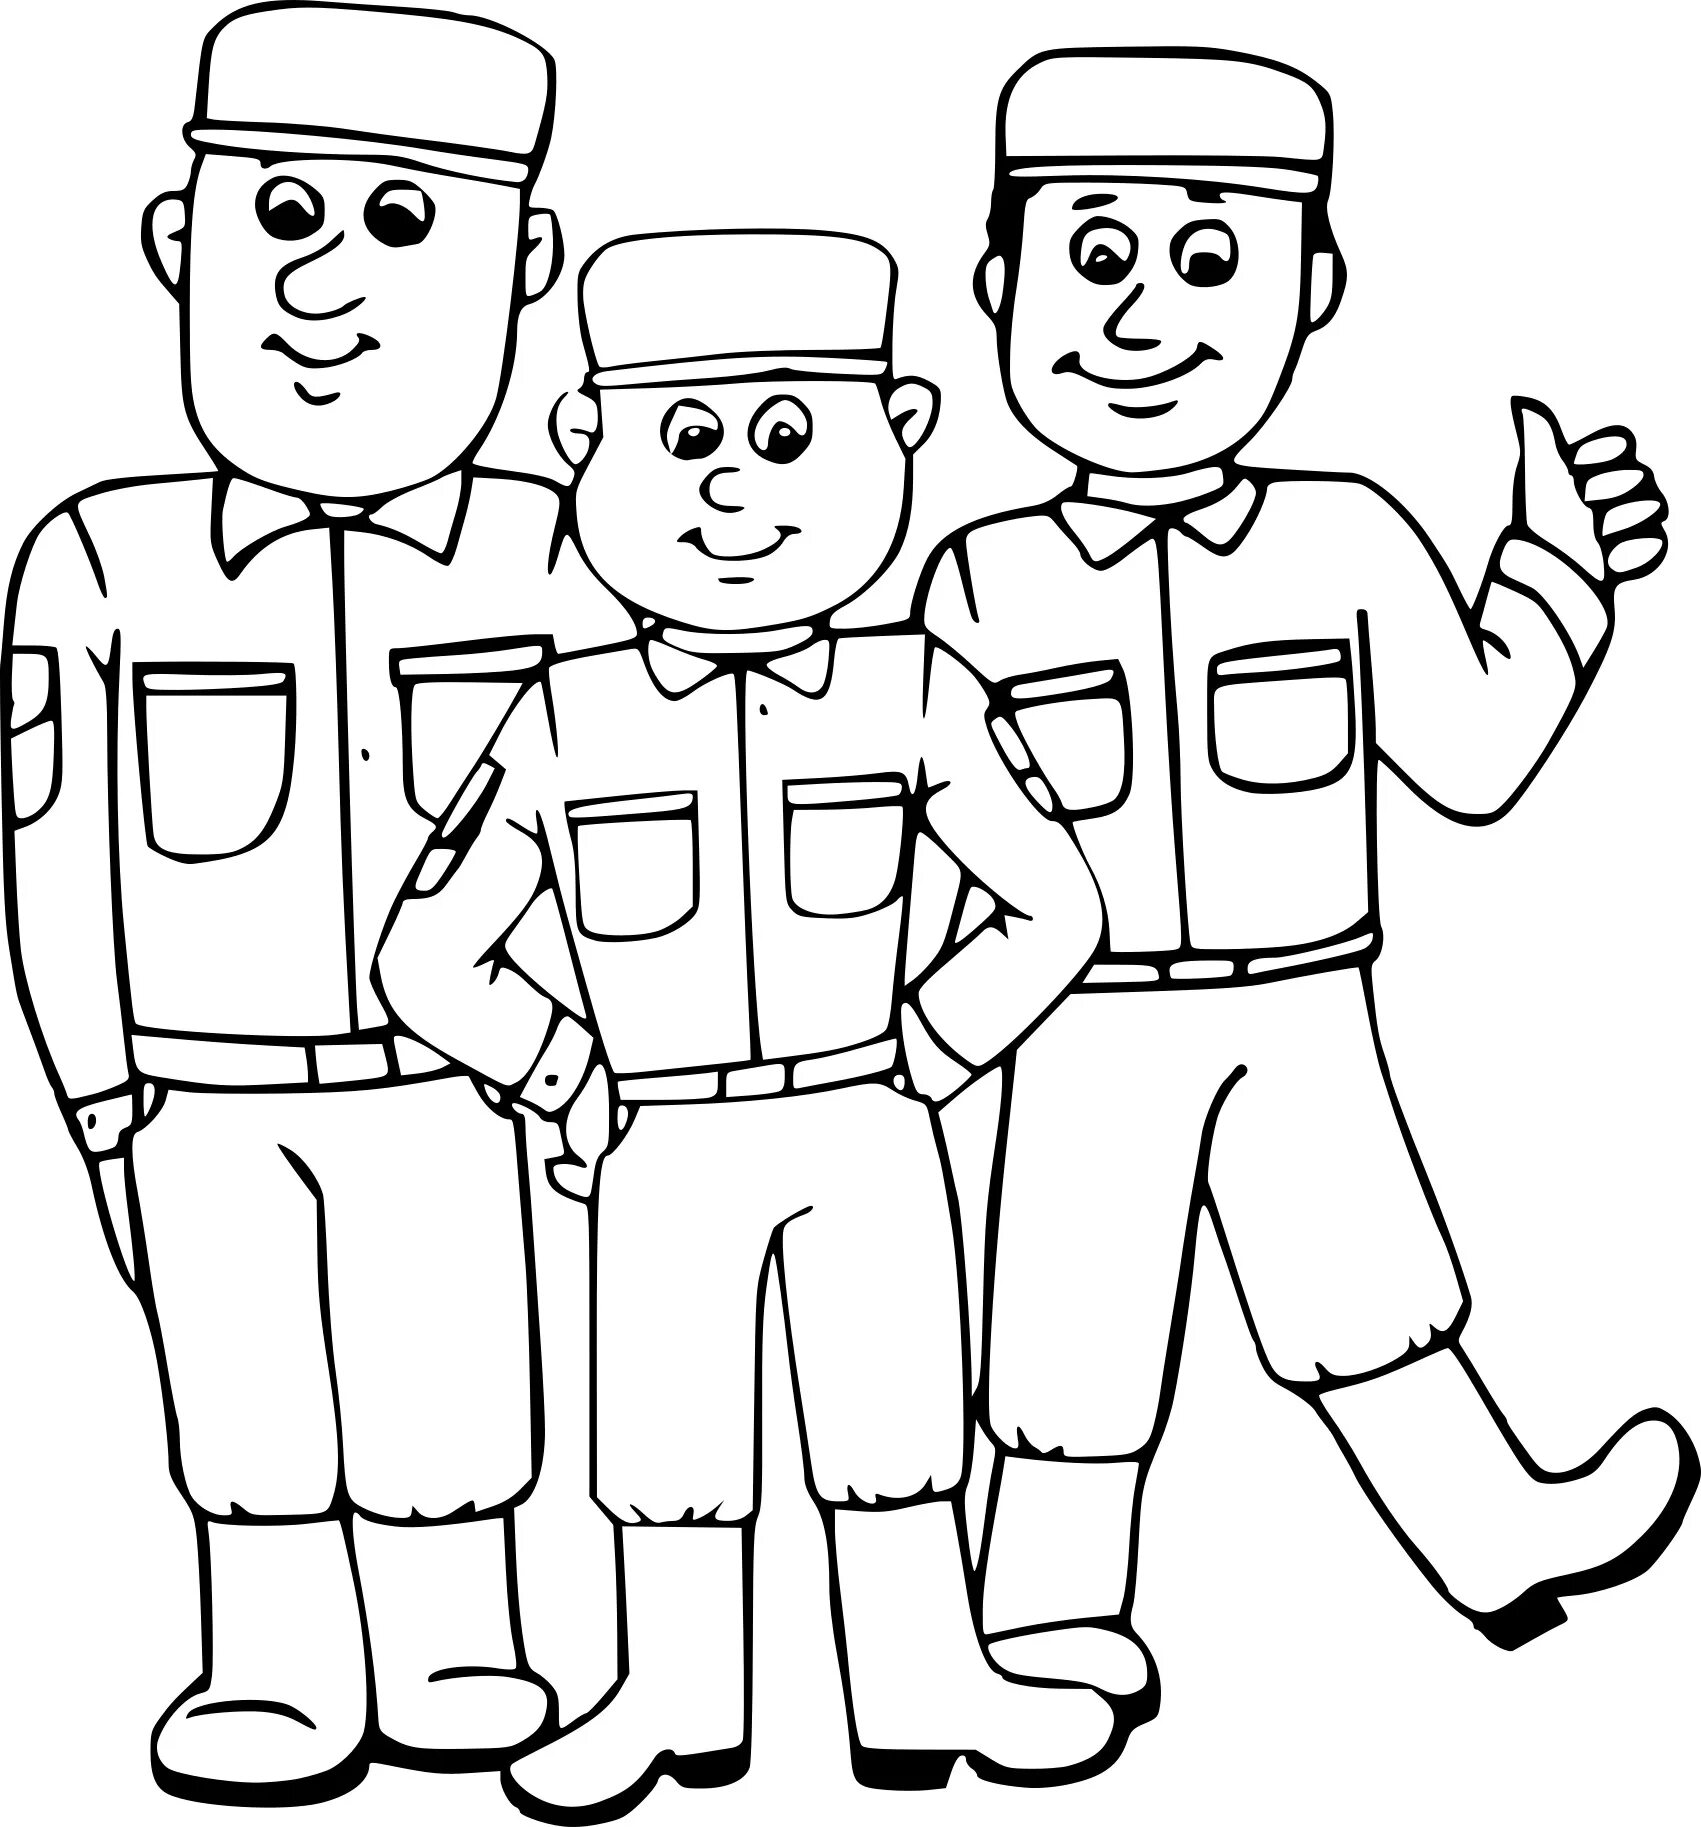 Military soldiers for children #6